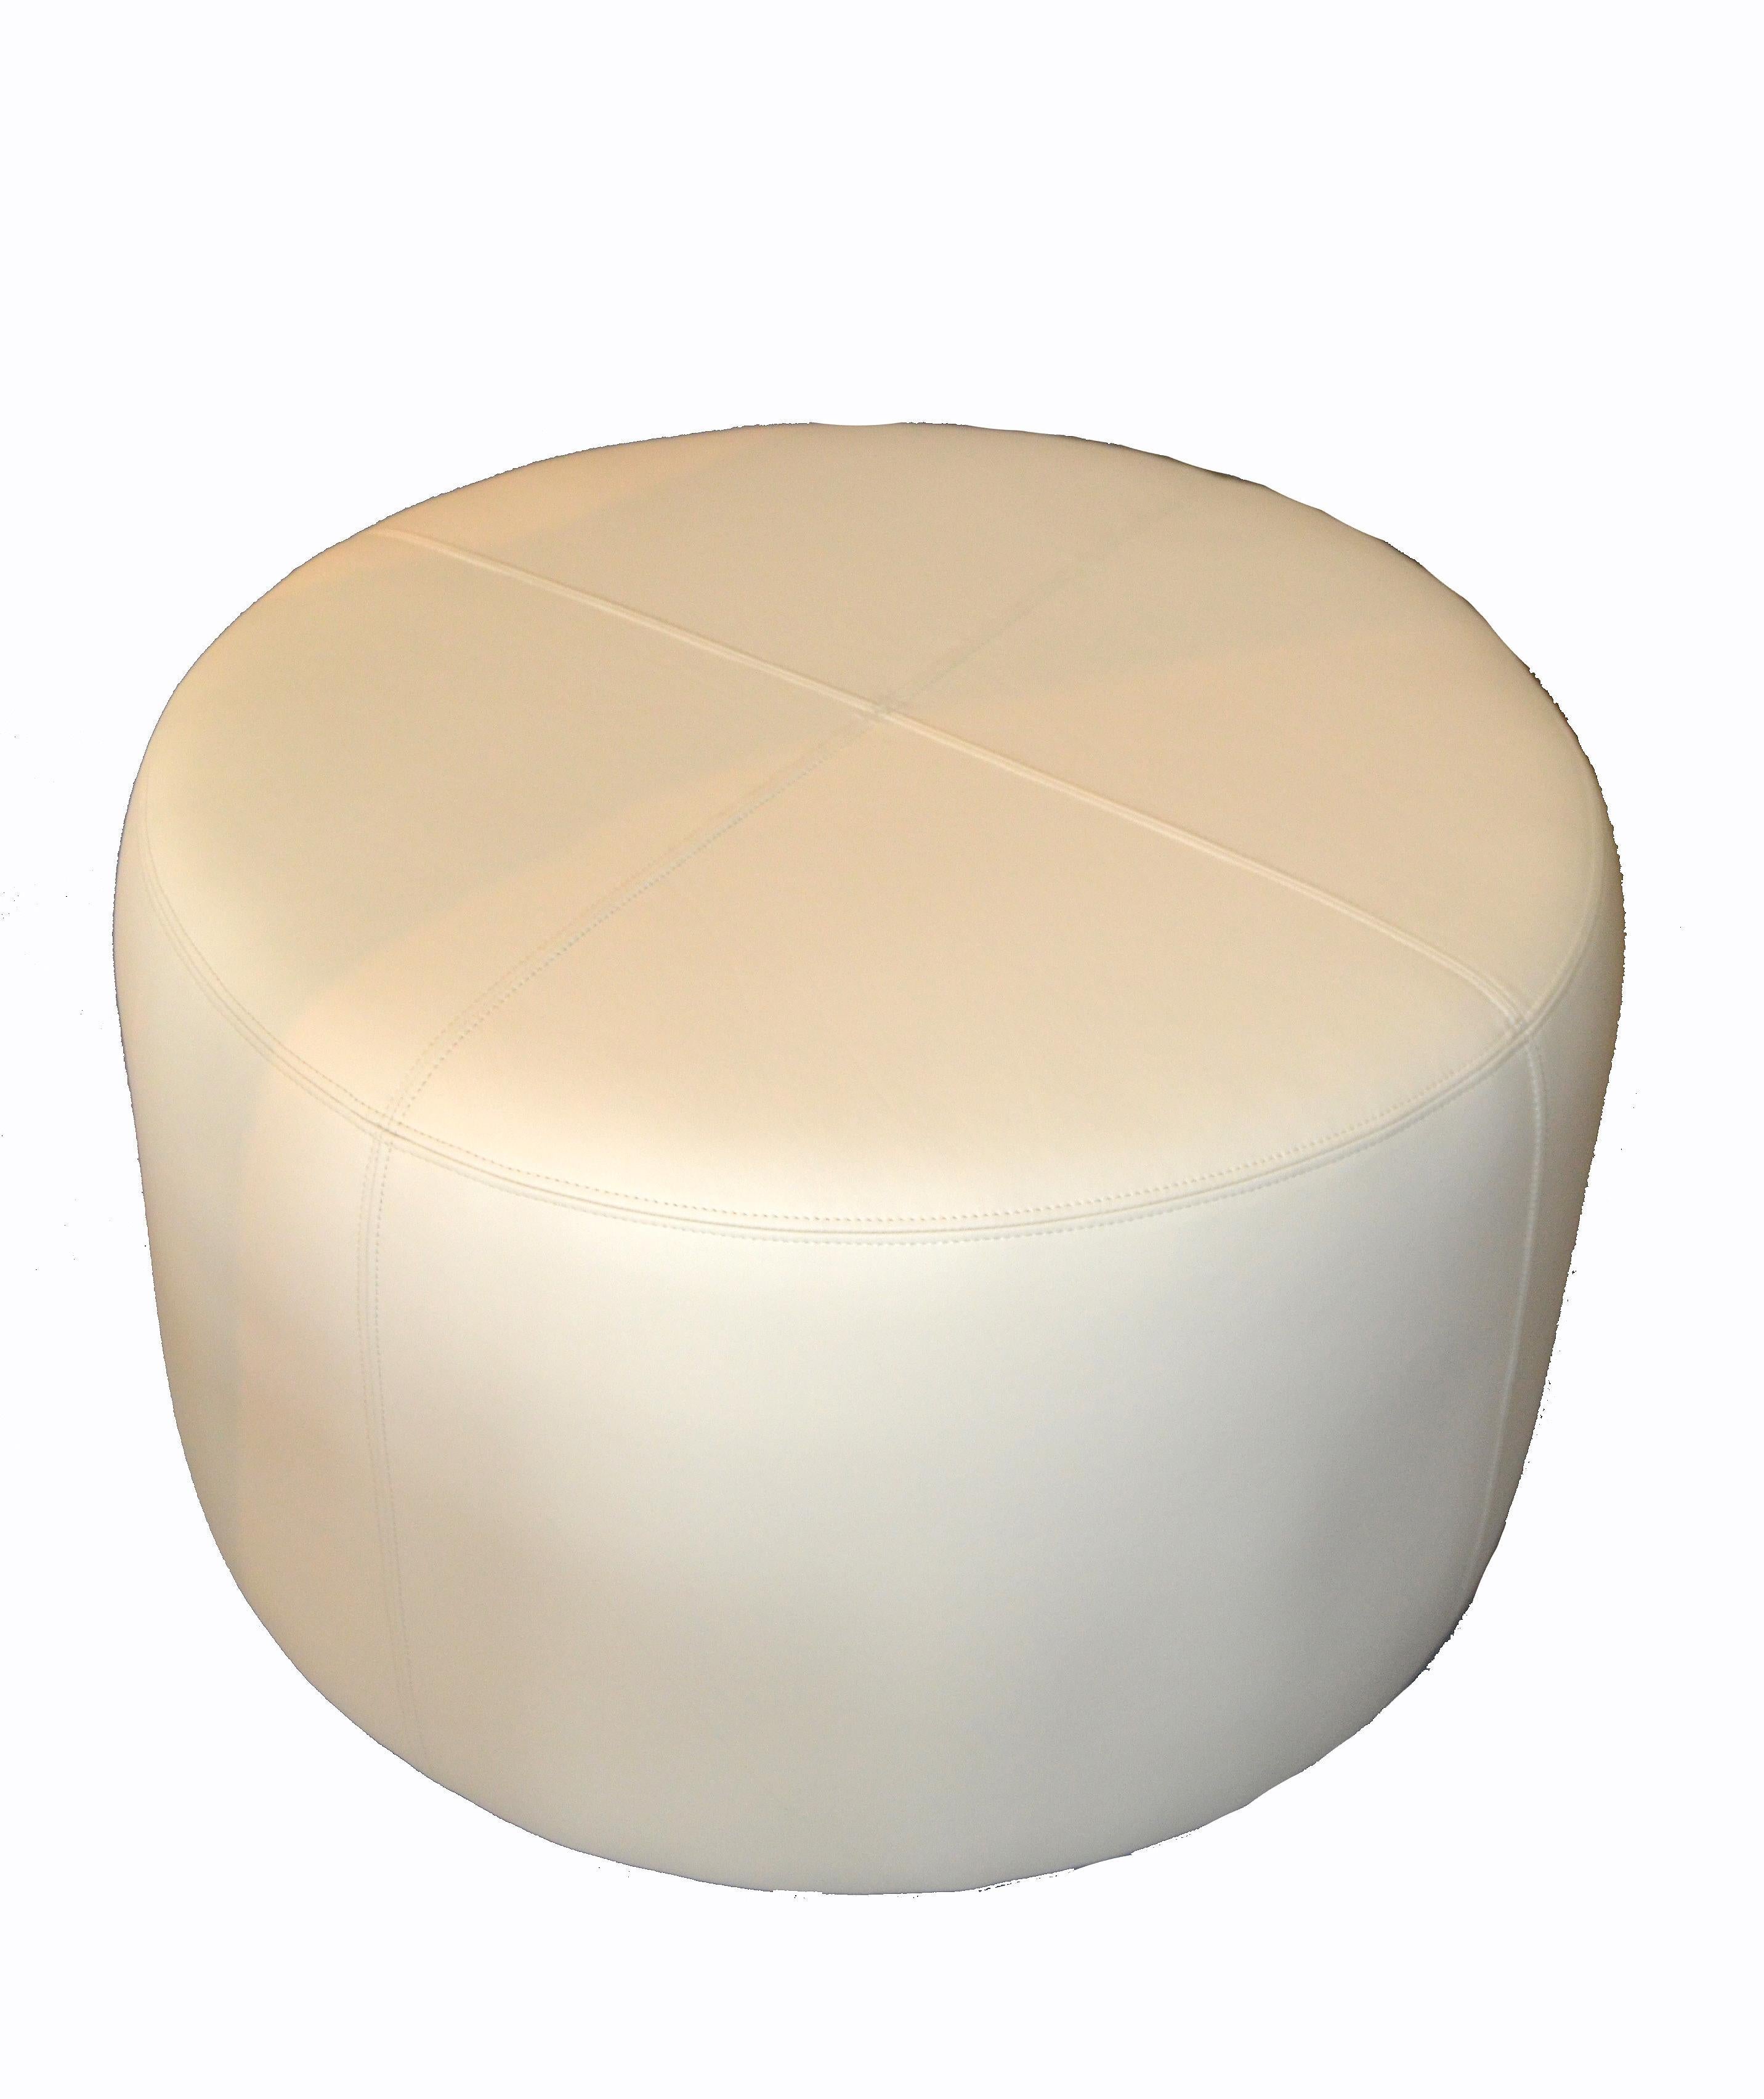 Modern Round Handcrafted Leather Ottoman, Pouf in Beige Leather, Contemporary 3